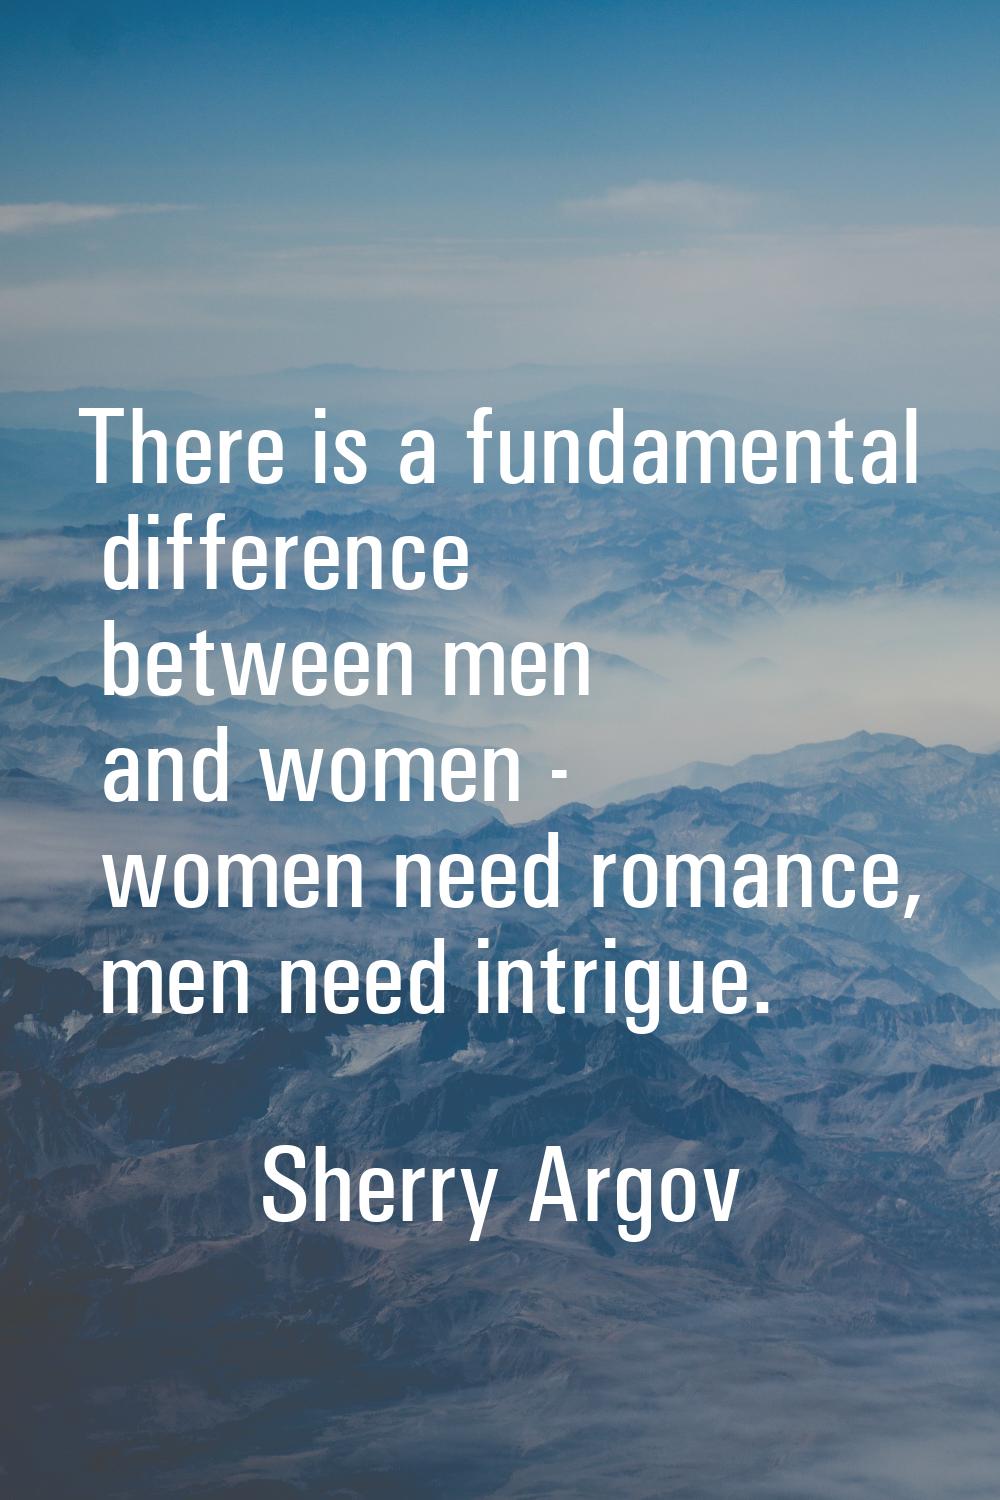 There is a fundamental difference between men and women - women need romance, men need intrigue.